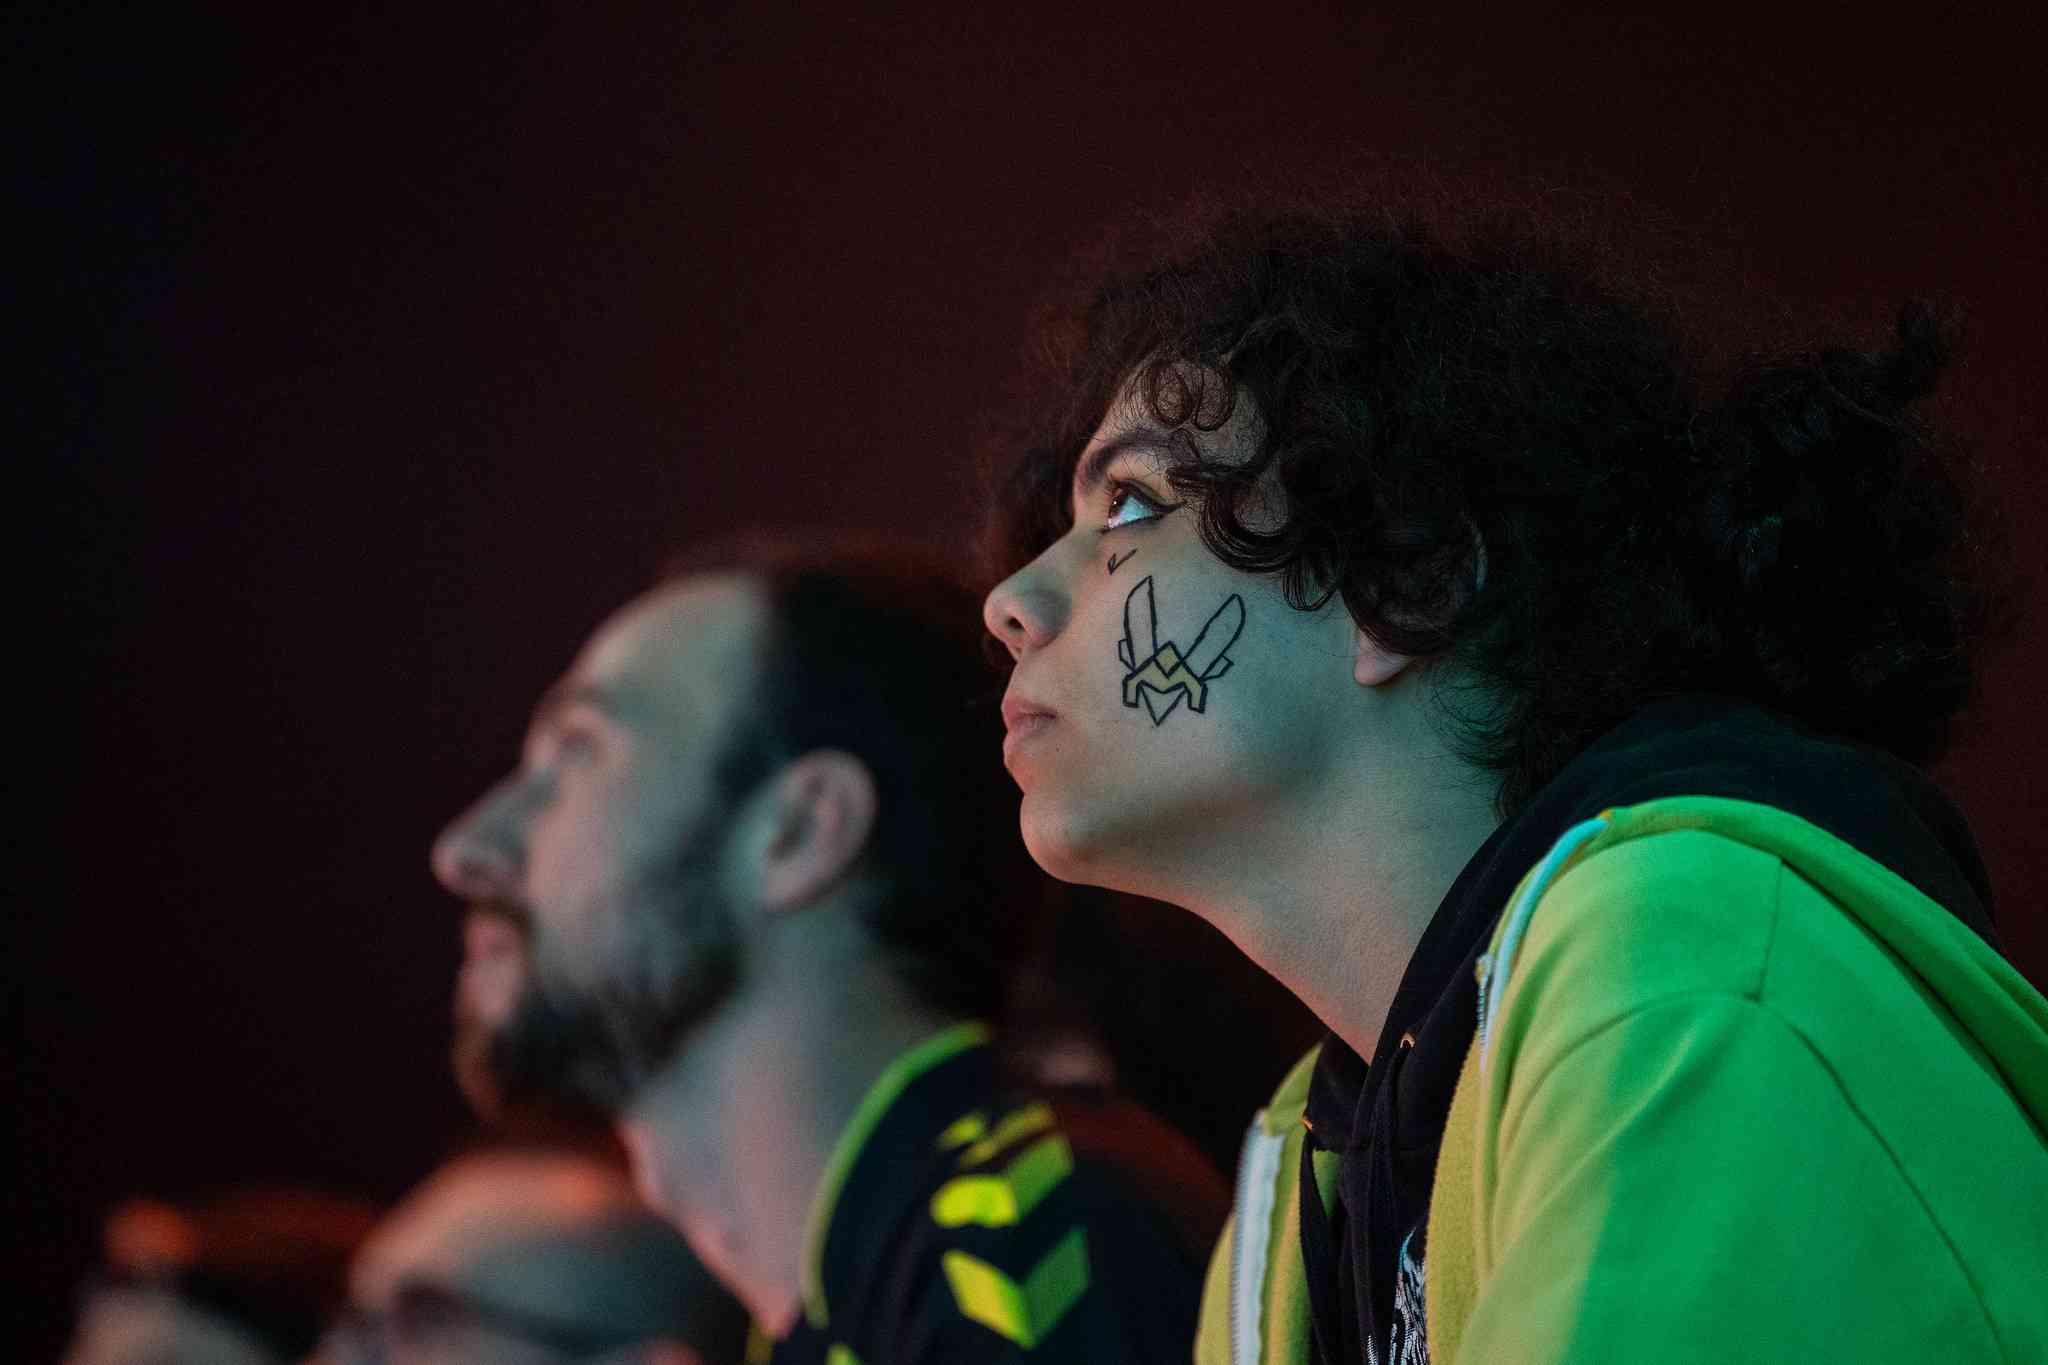 Vitality fans wearing team memorabilia and face paint watch the stage during a live game.